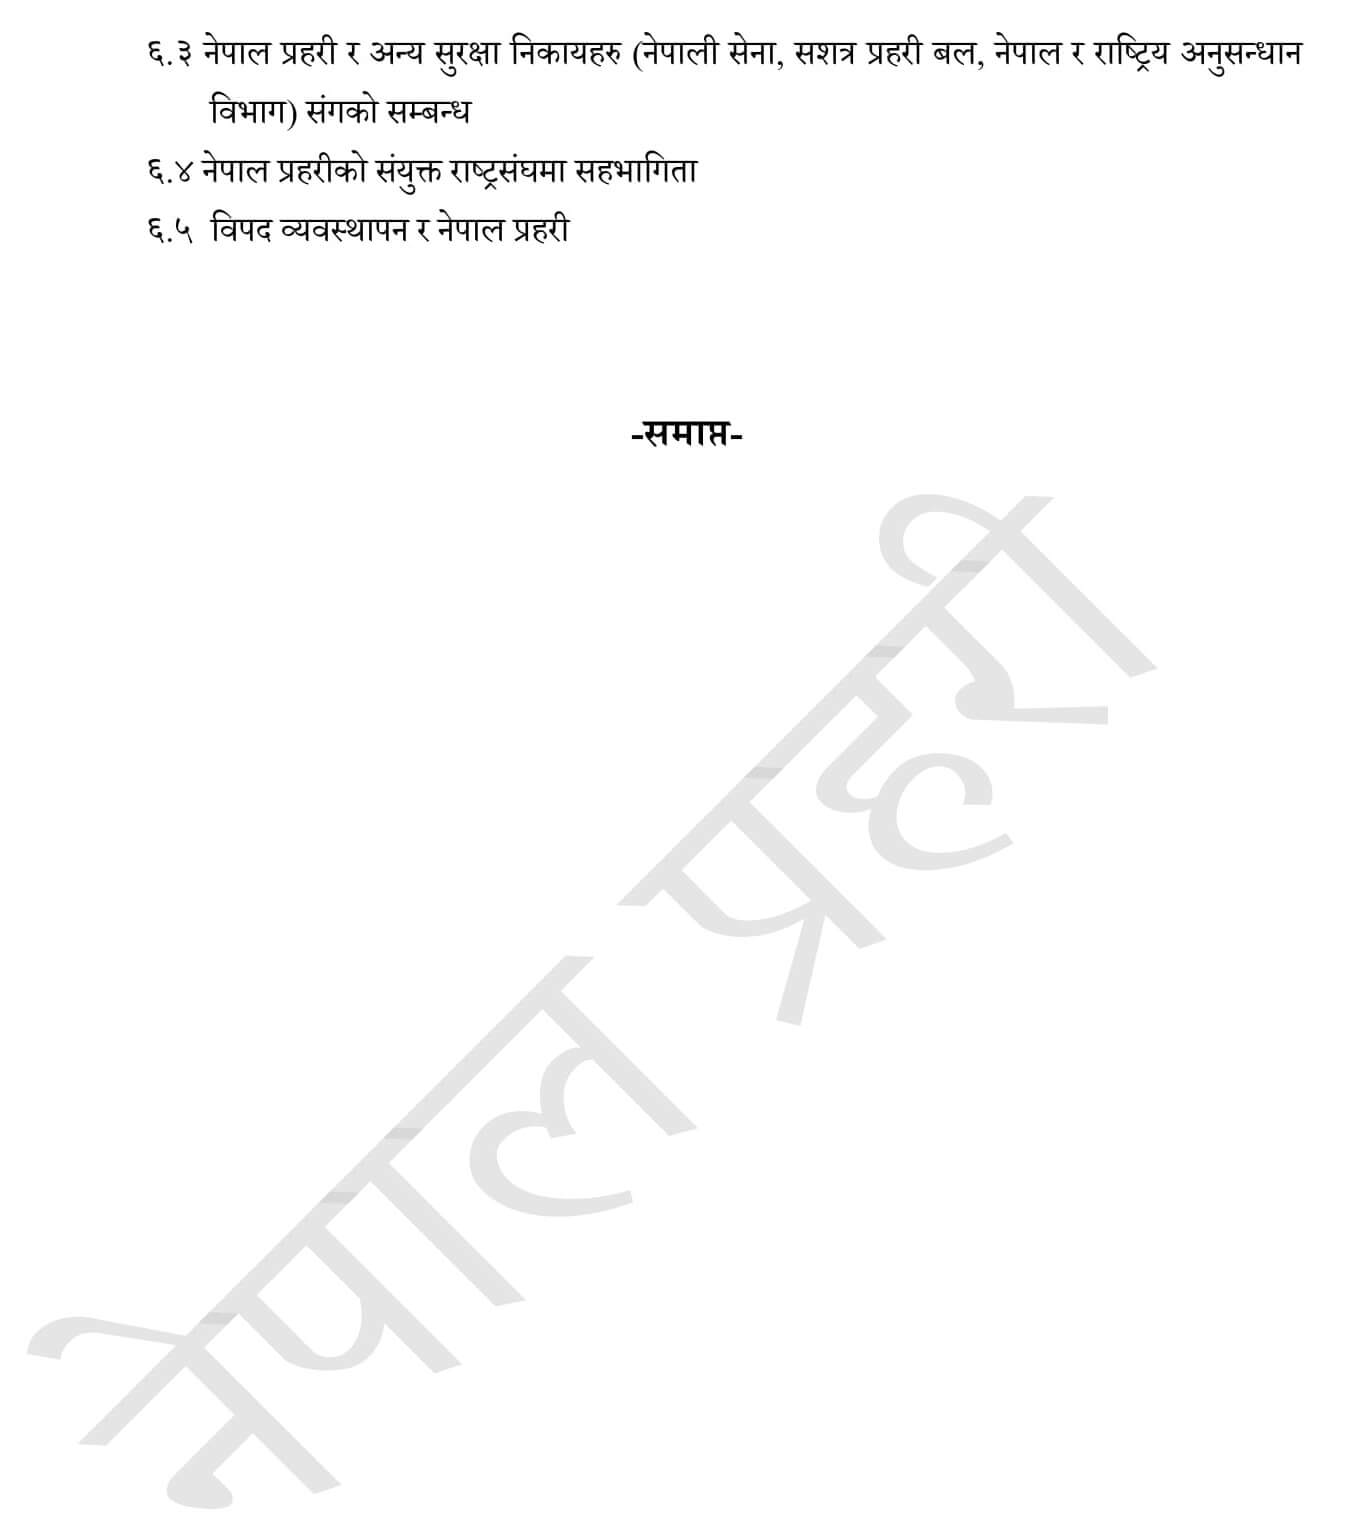 Syllabus of Nepal Police Technical SI - Computer